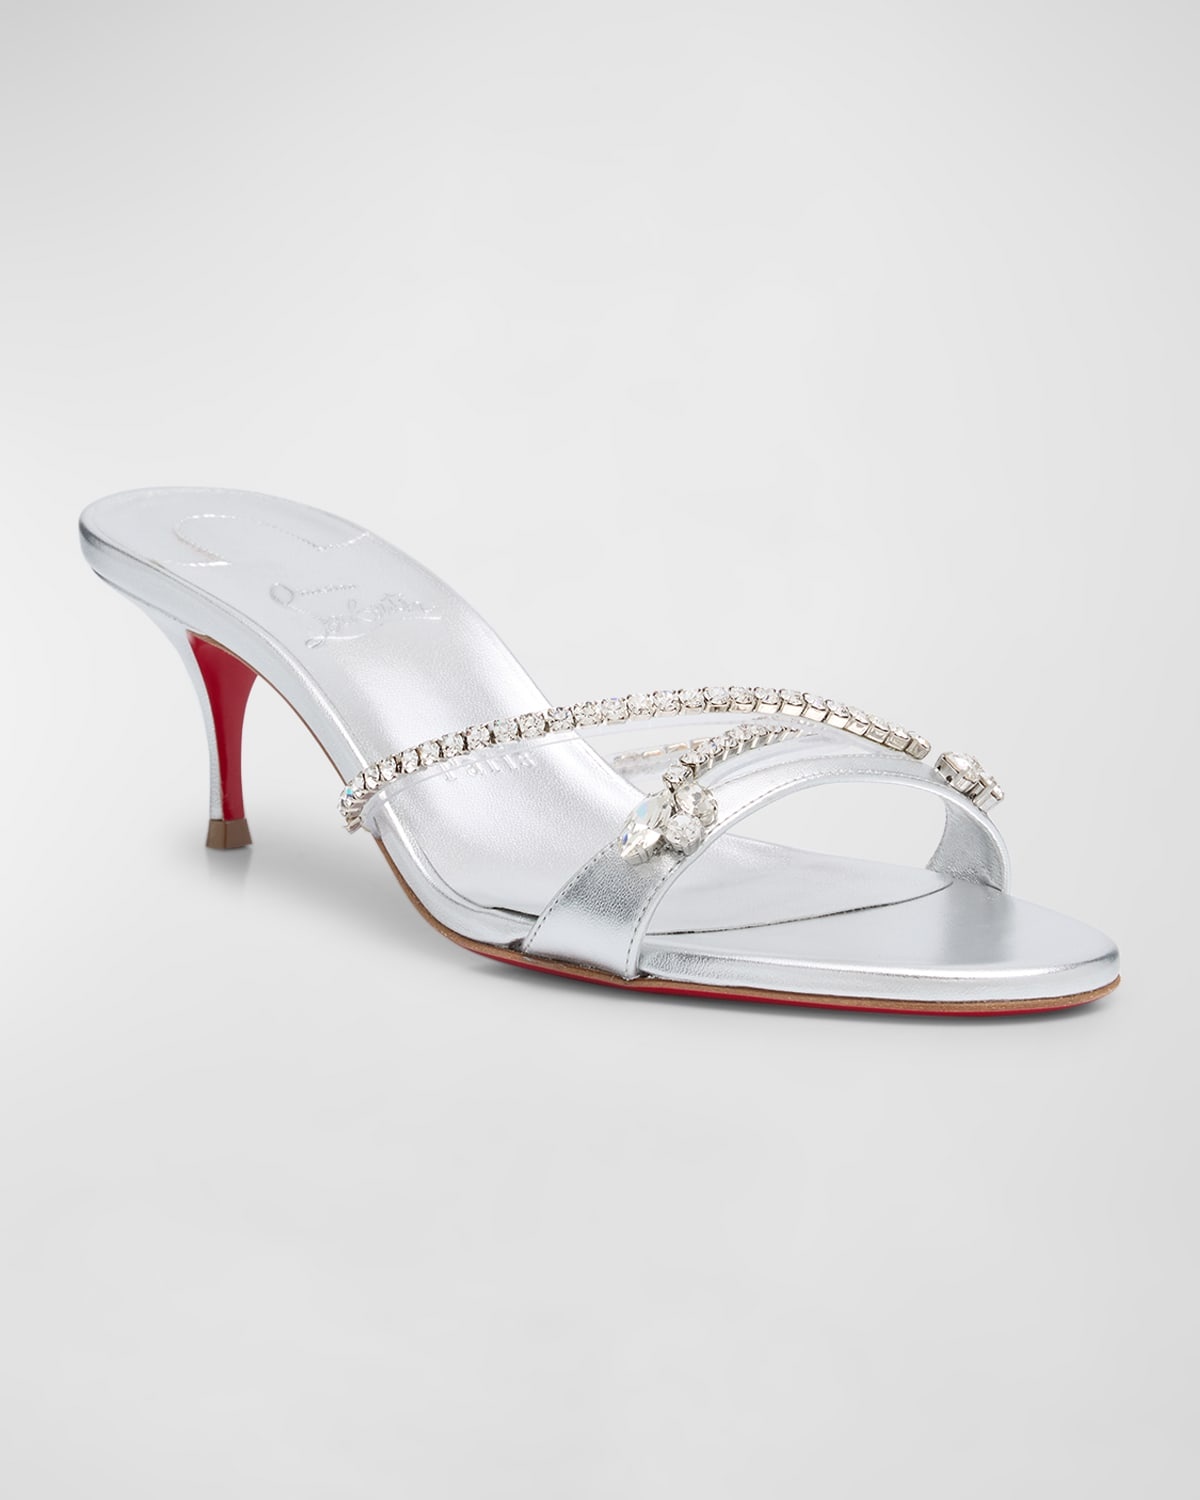 Iza Queen Crystal Red Sole Mule Sandals - 2